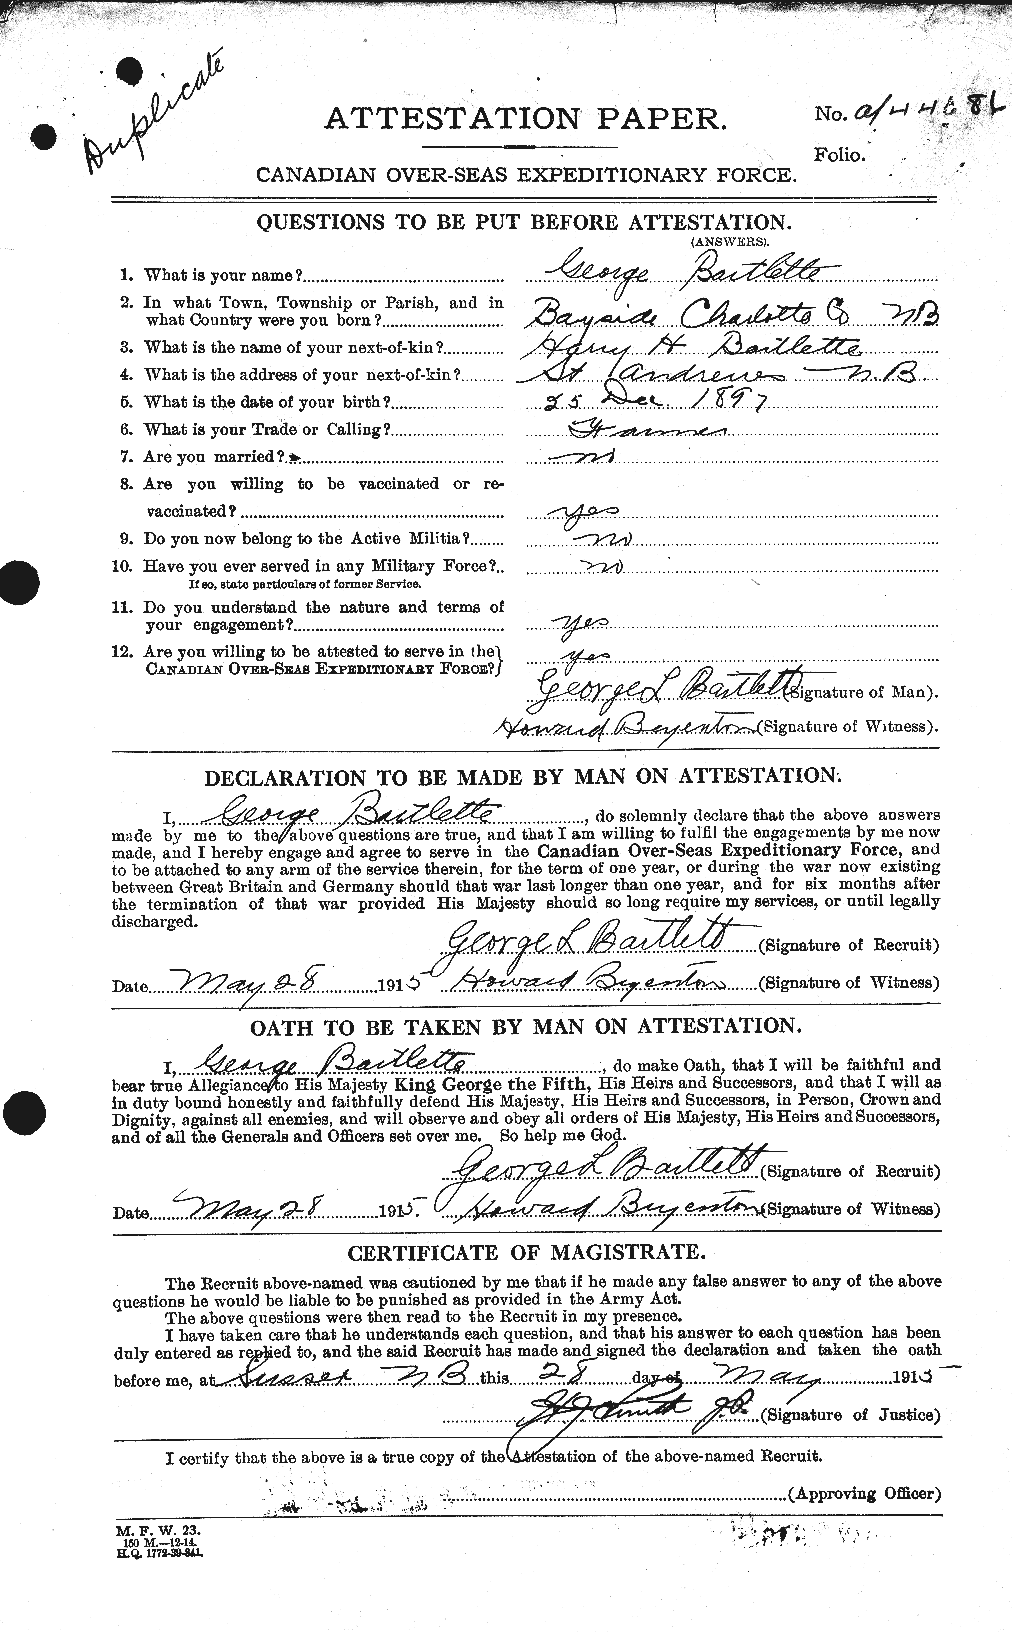 Personnel Records of the First World War - CEF 229367a